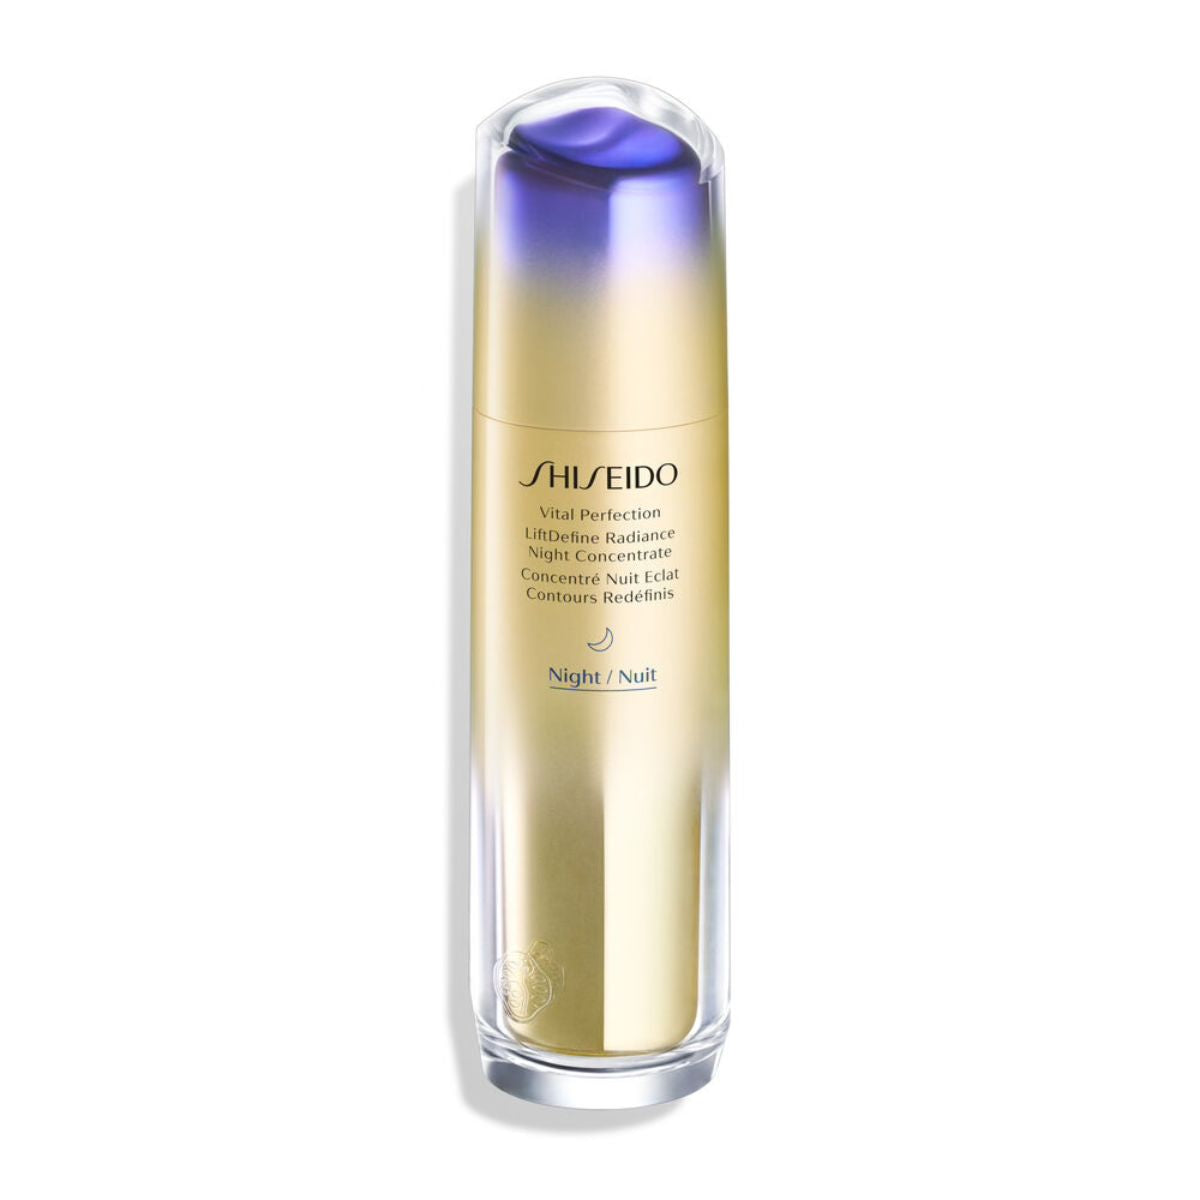 Shiseido Vital Perfection Night Lift Define Radiance Night Concentrate